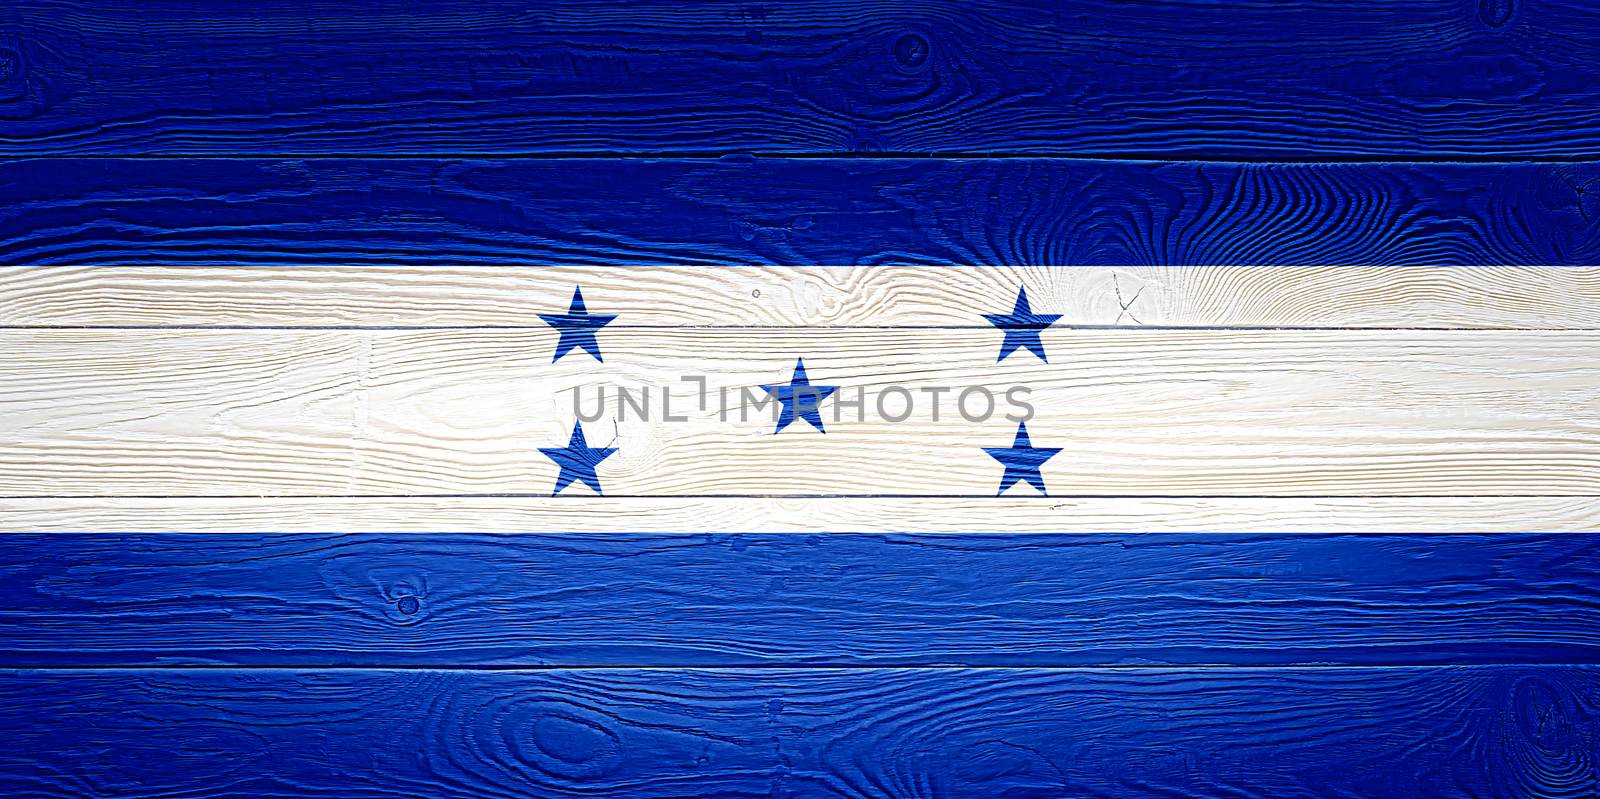 Honduras flag painted on old wood plank background. Brushed wooden board texture. Wooden texture background flag of Honduras